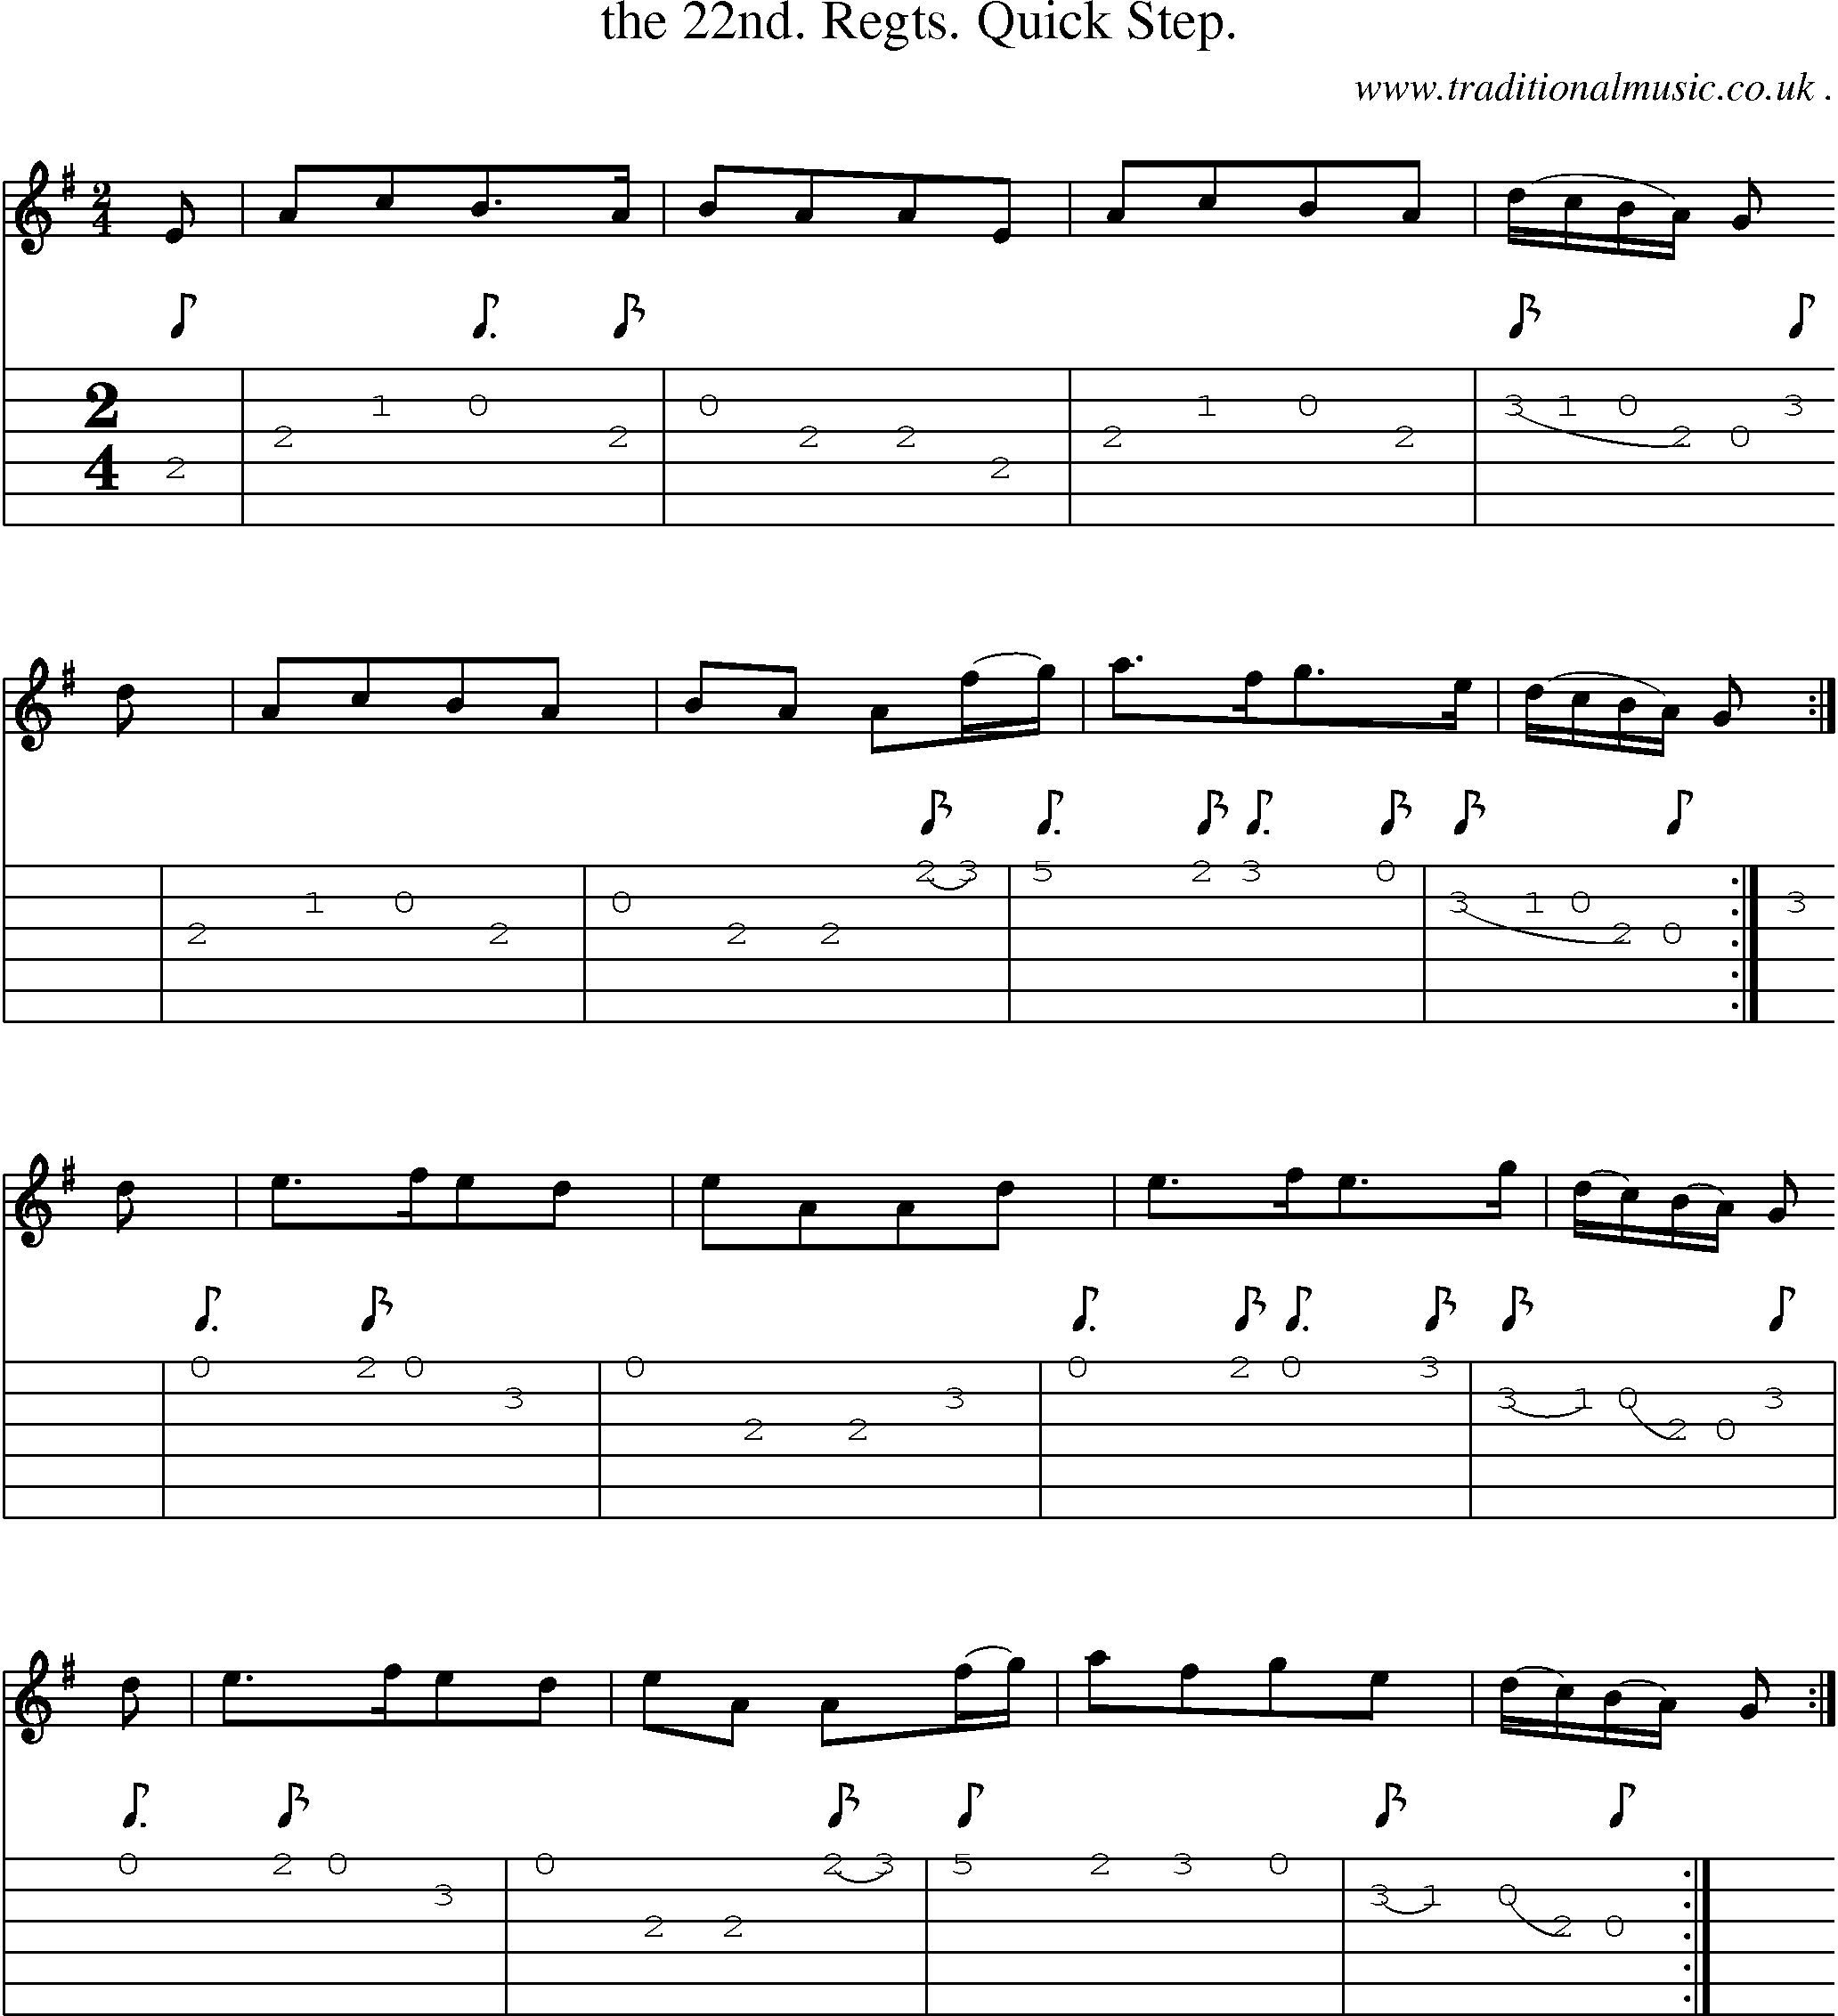 Sheet-Music and Guitar Tabs for The 22nd Regts Quick Step